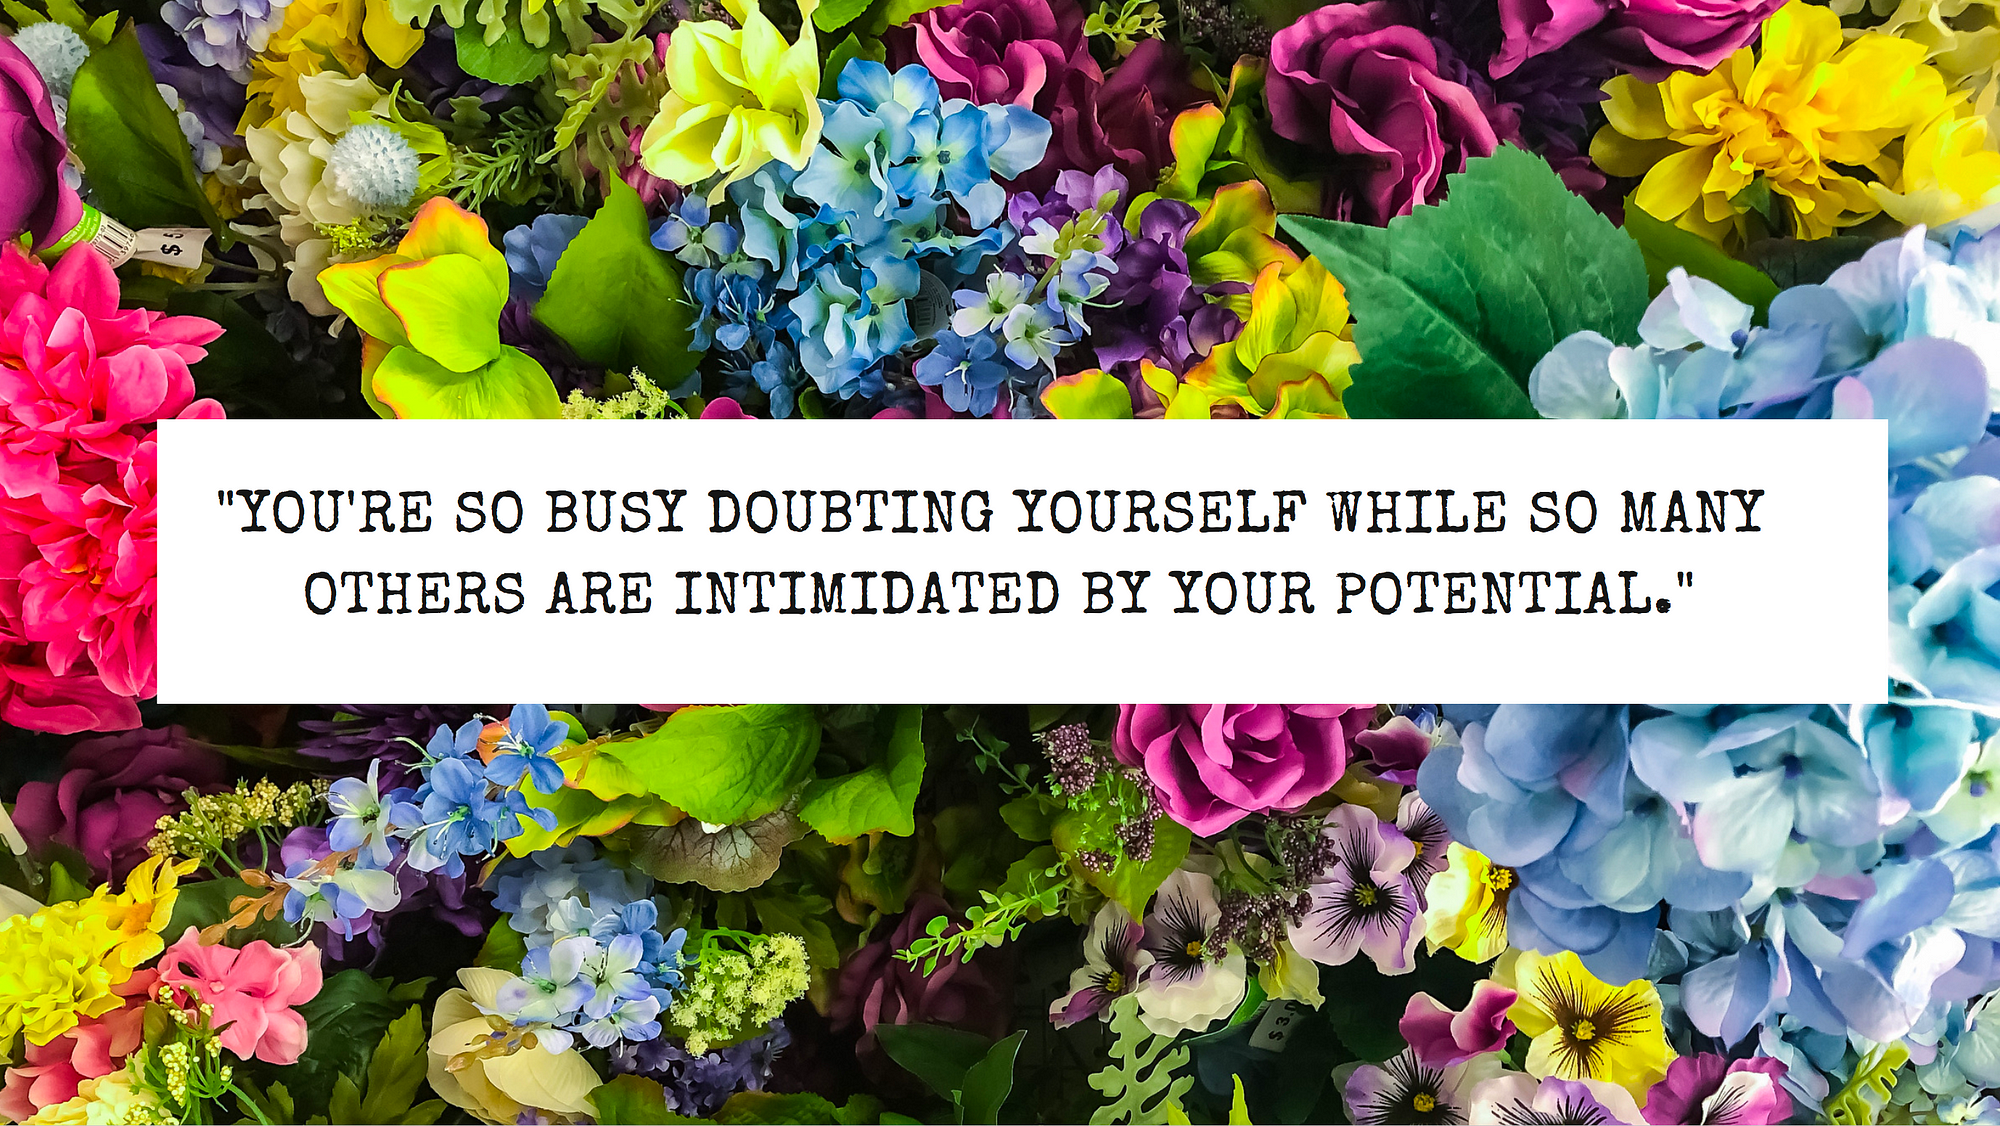 You're so busy doubting yourself while so many others are intimidated by  your potential.”, by Olya Barnett, Publishous